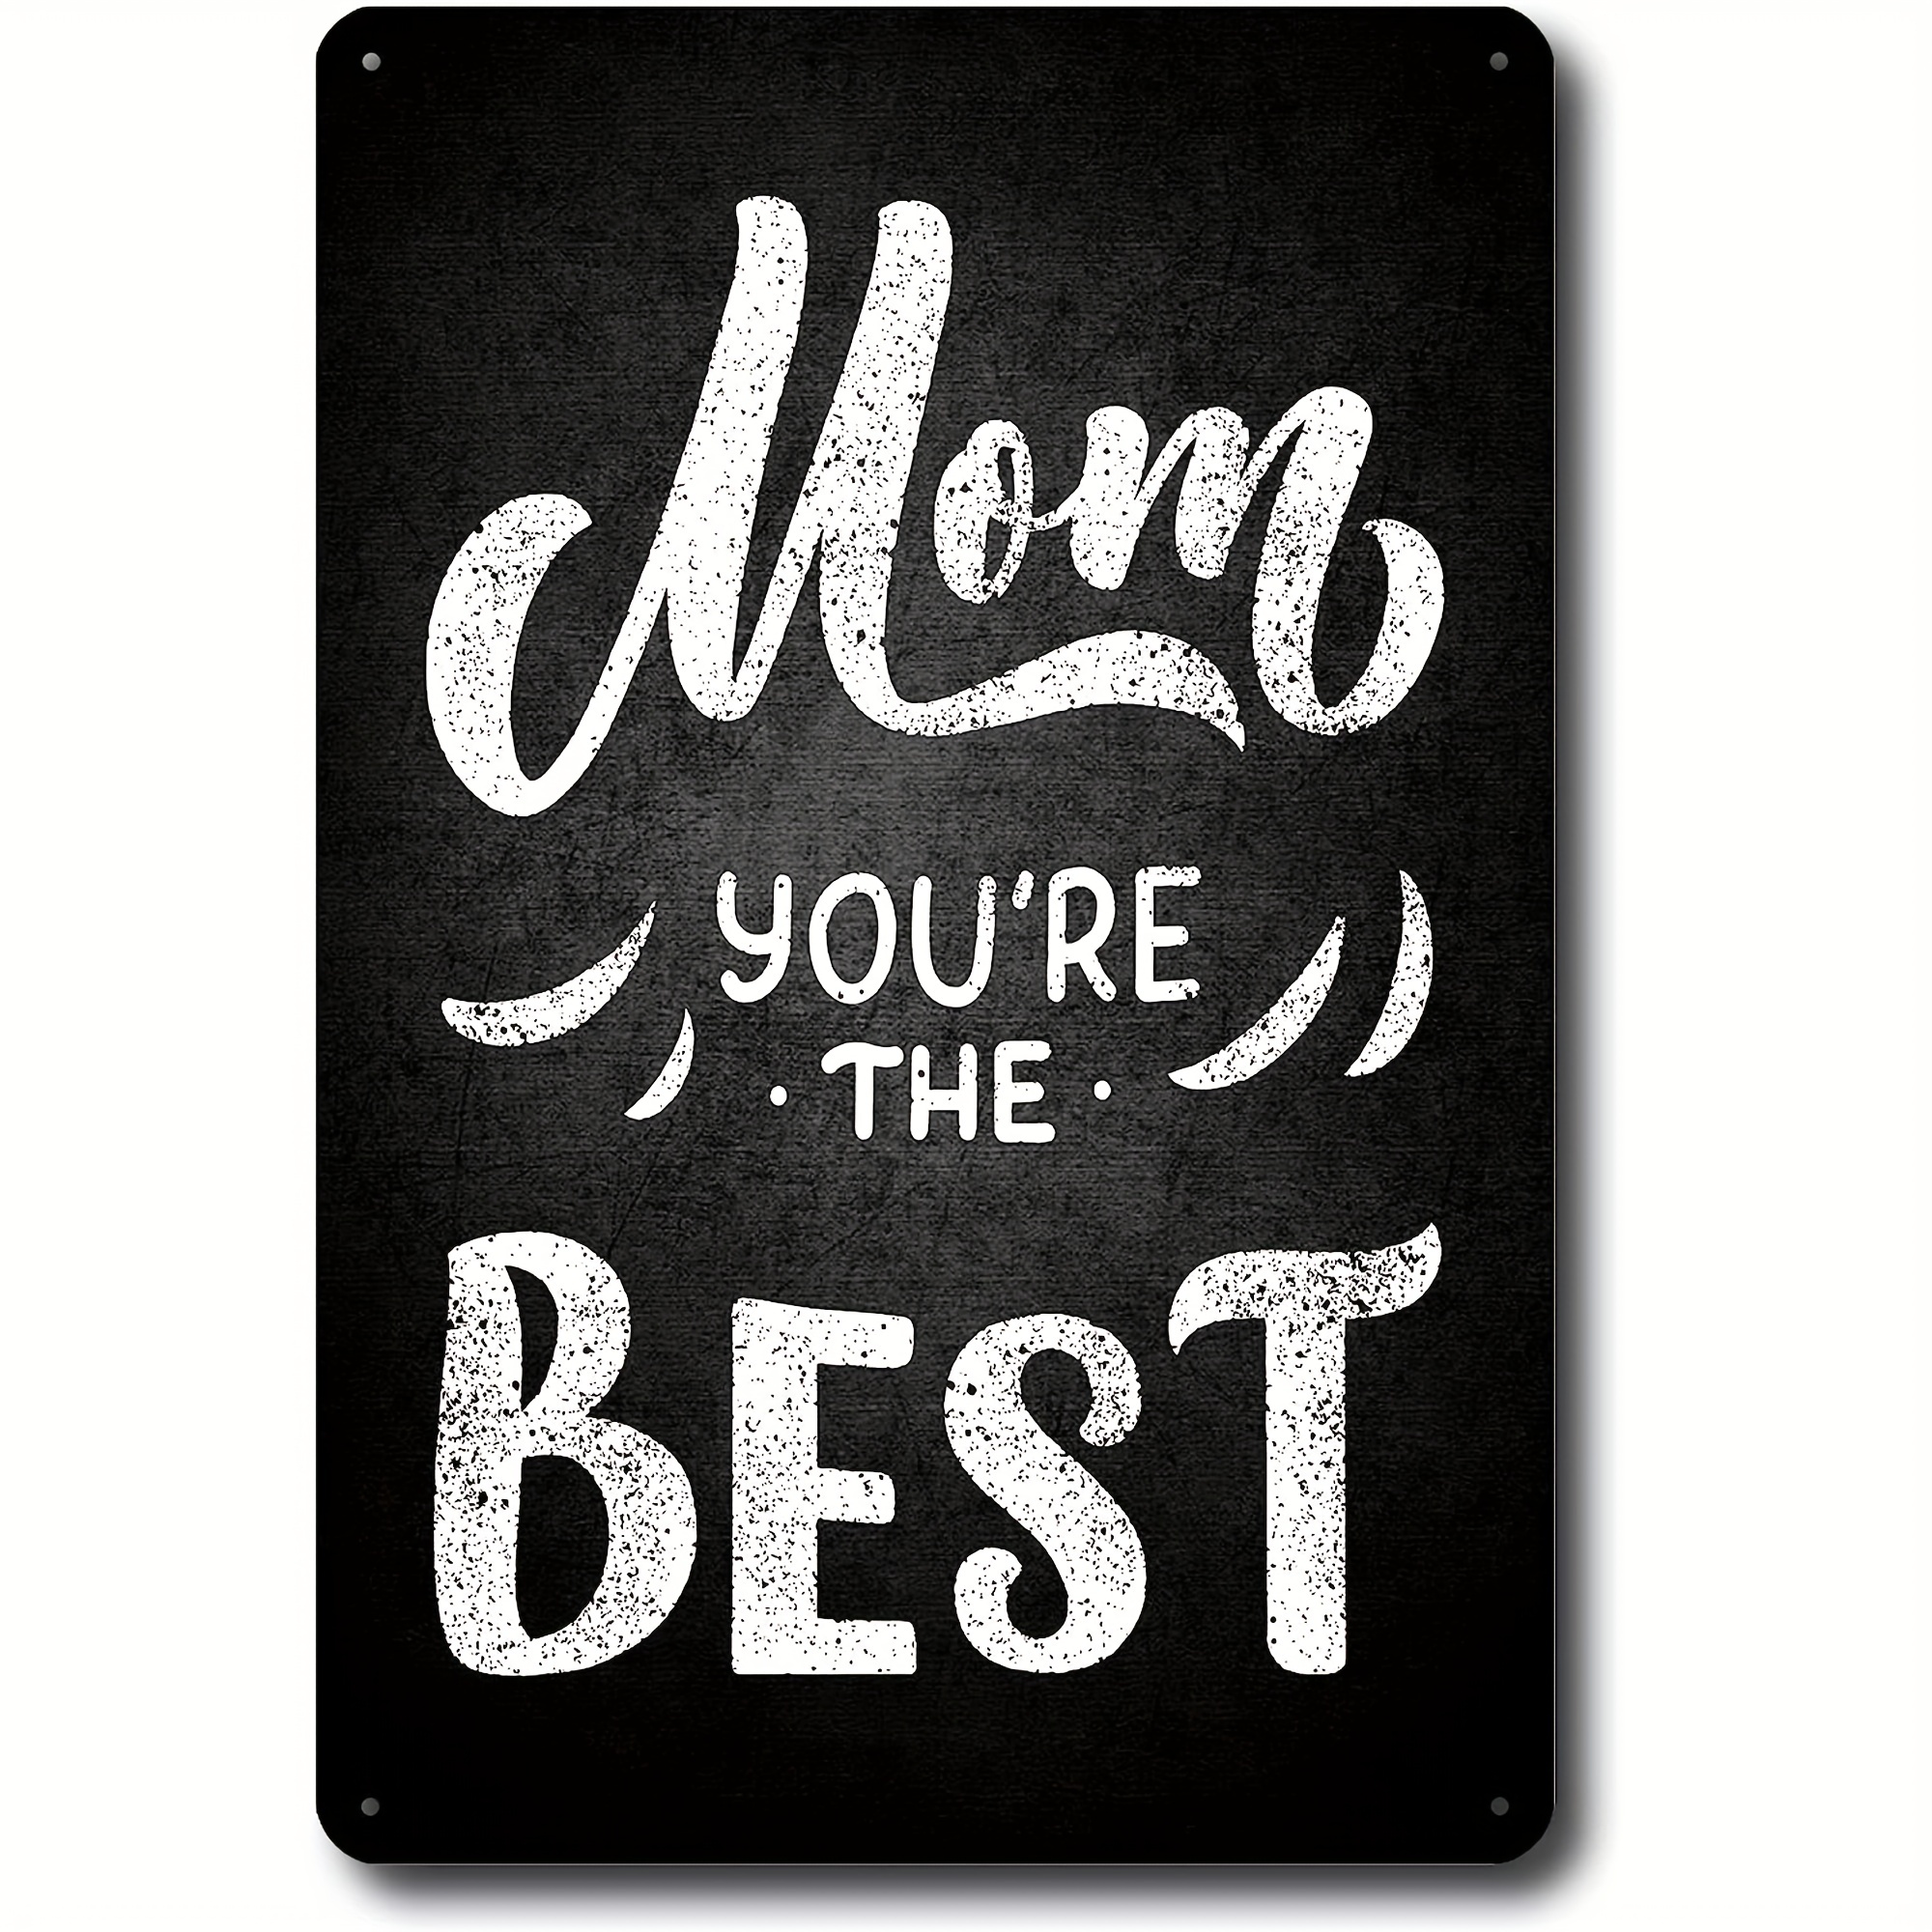 From Daughter To My Mom Round Wooden Sign Gift For Mom - Temu